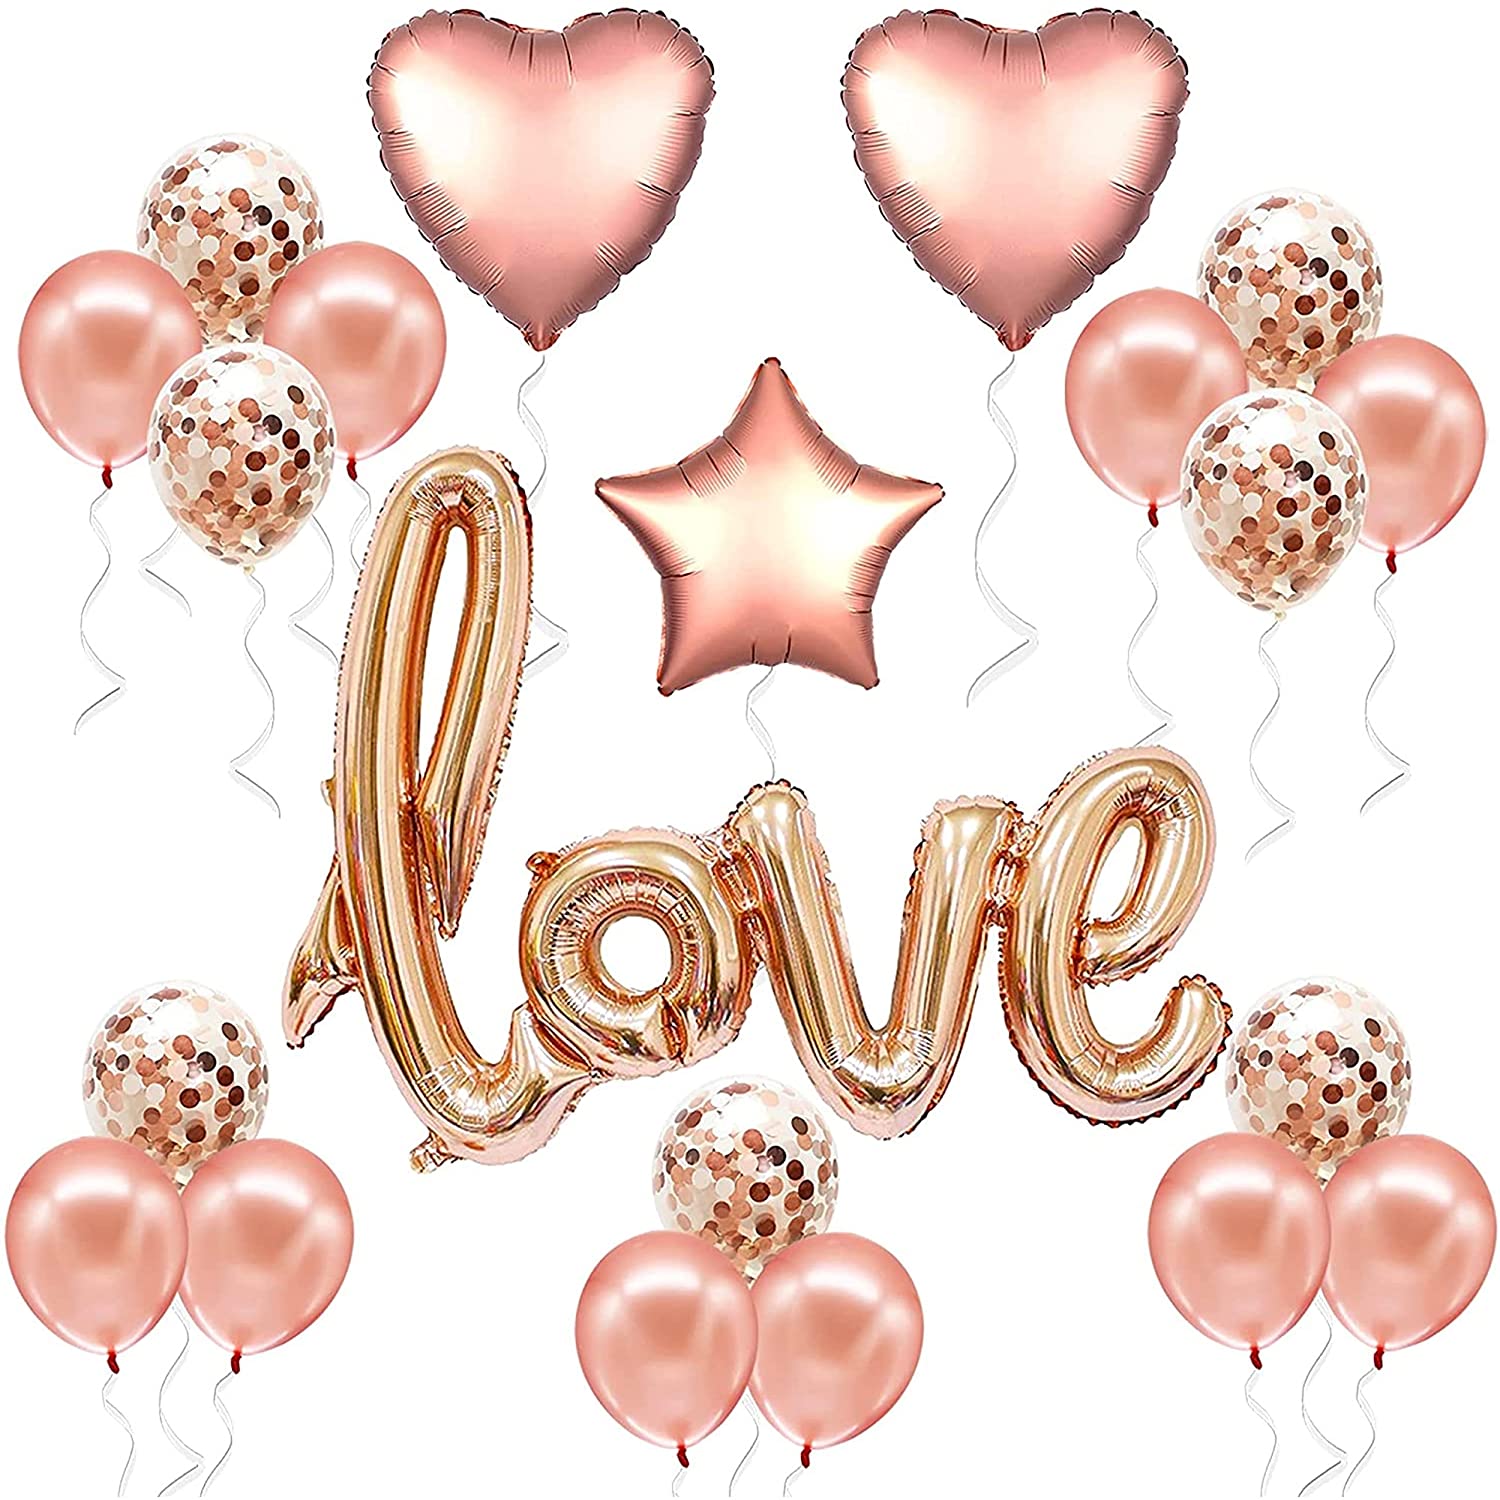 Love Shape Letter Foil Balloon with Rose Gold Confetti and Rose Gold Metallic Balloons for Birthday Wedding Valentine’s Day (21 piece)